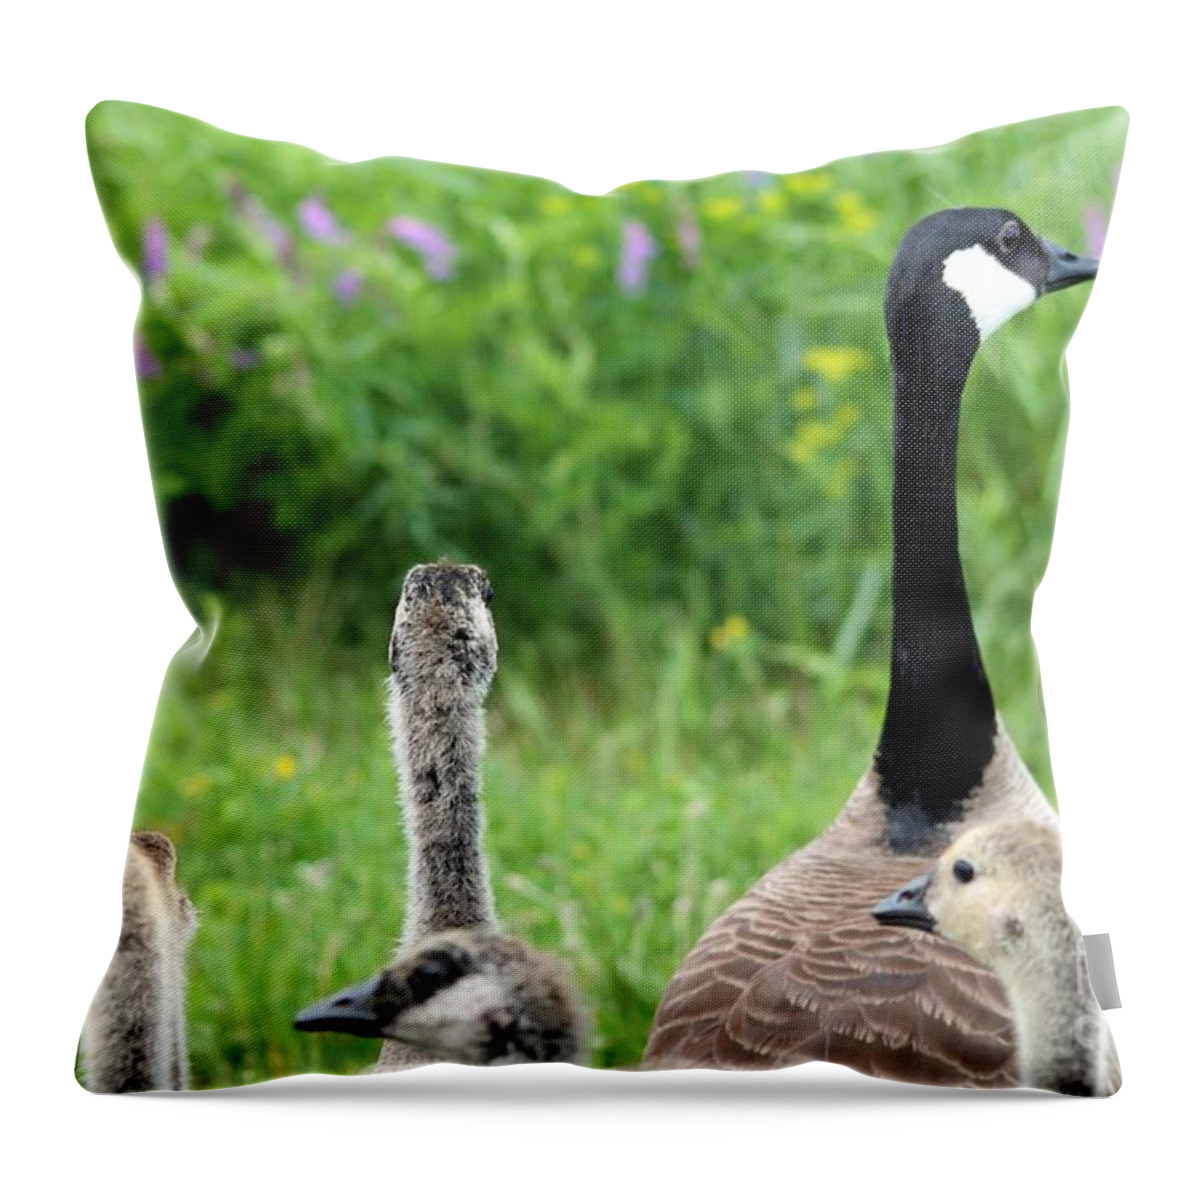 Mccombie Throw Pillow featuring the photograph Canada Geese #3 by J McCombie